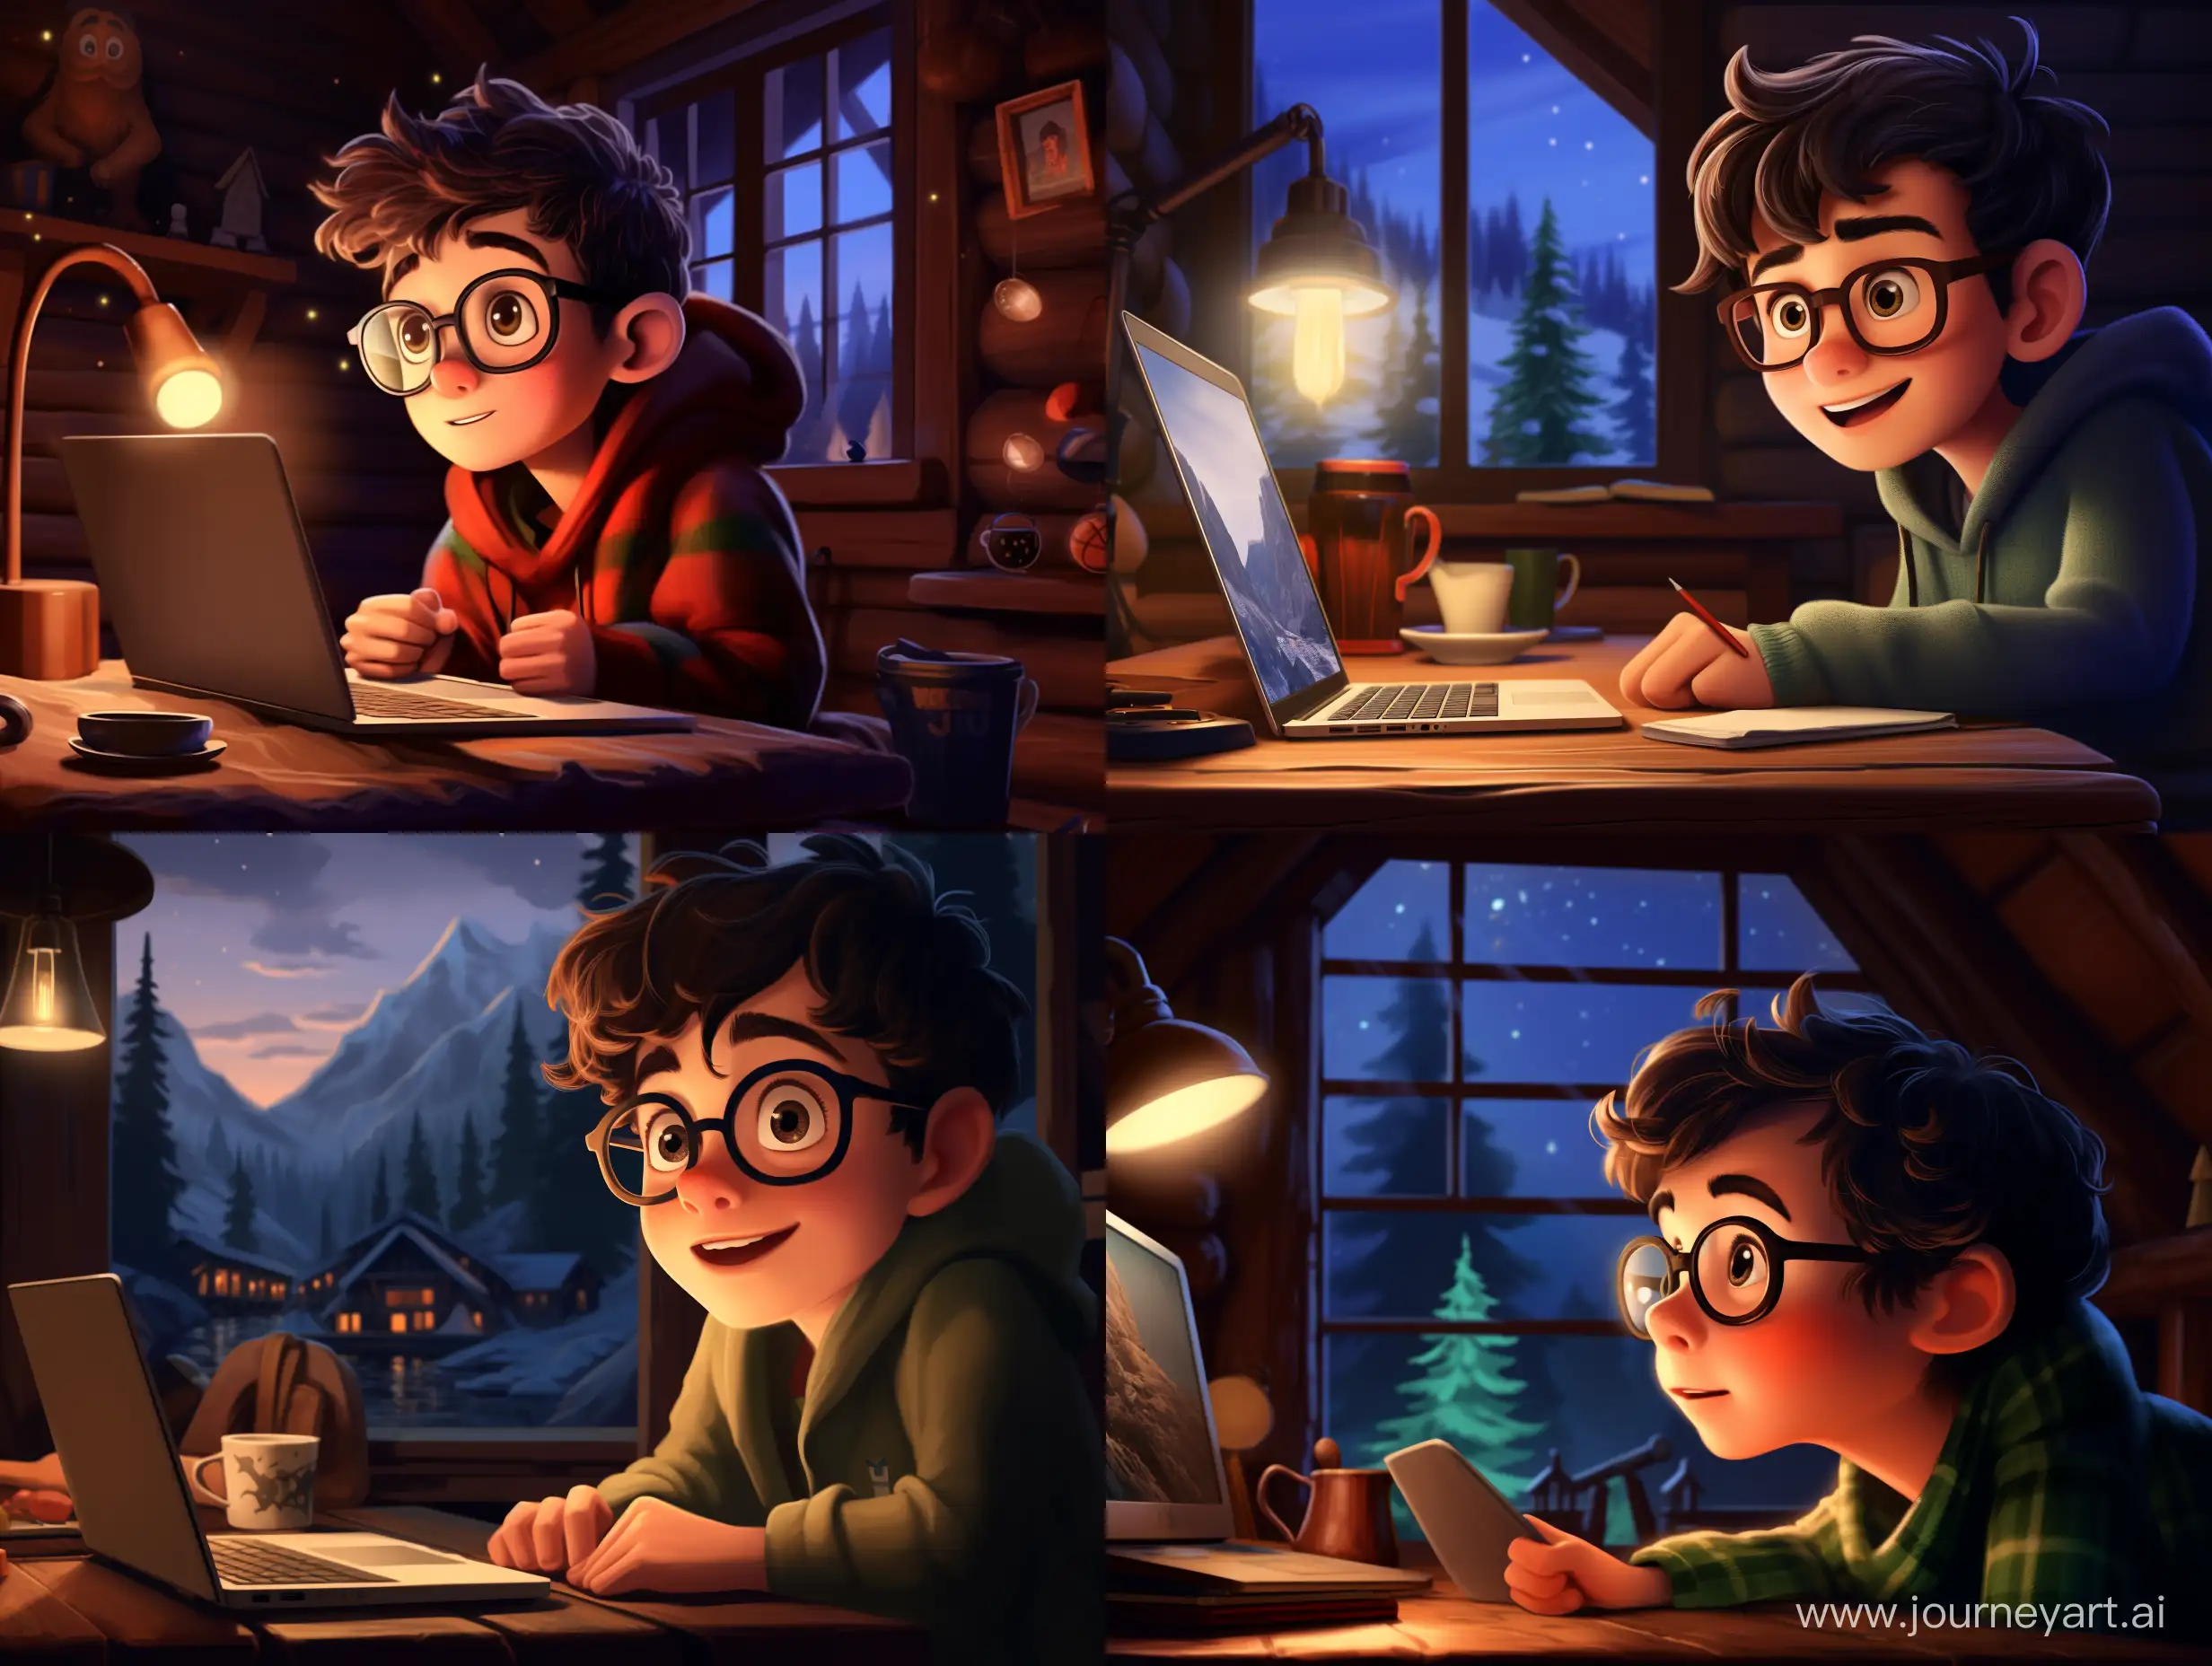 A boy wearing glasses looking surprised in Pixar style and working with his laptop sitting in a cozy seat in a cozy cabin, snowing outside, fireplace